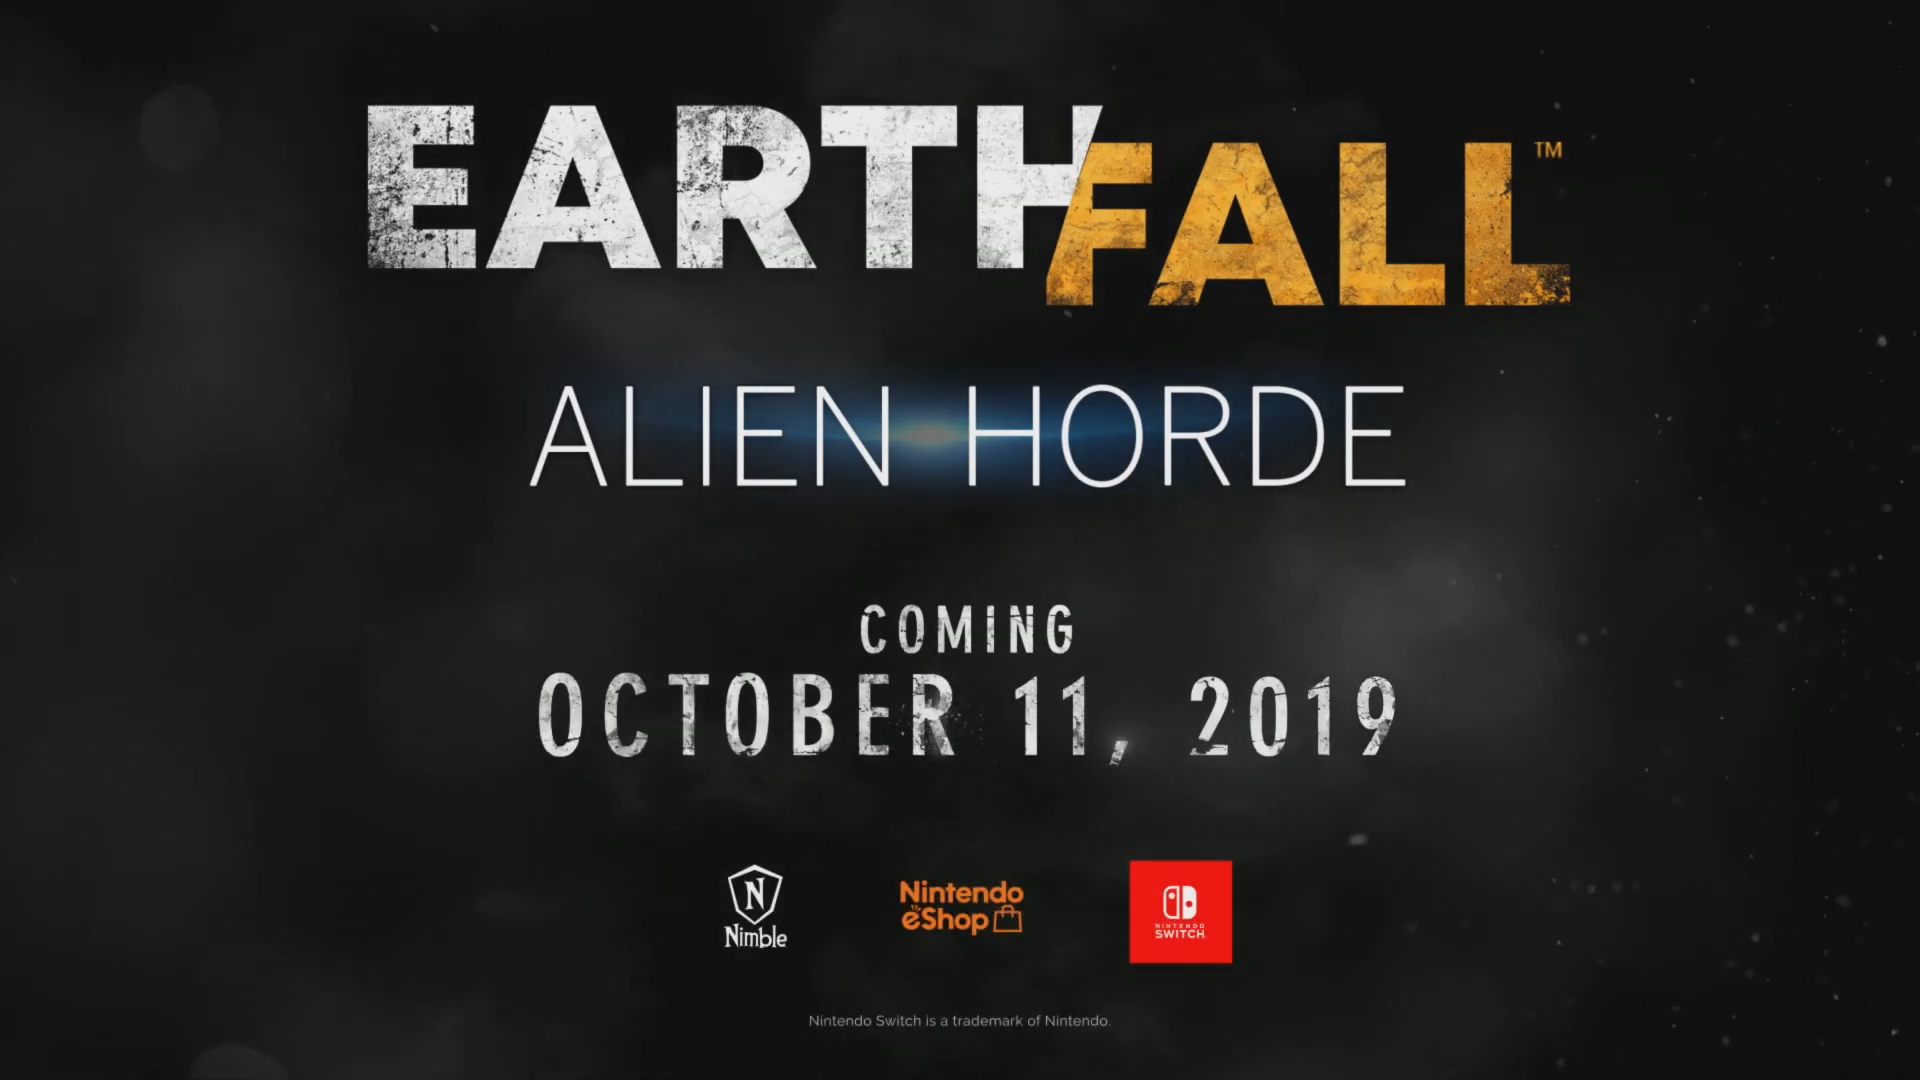 Earthfall: Alien Horde announced for Switch, launching October 11th